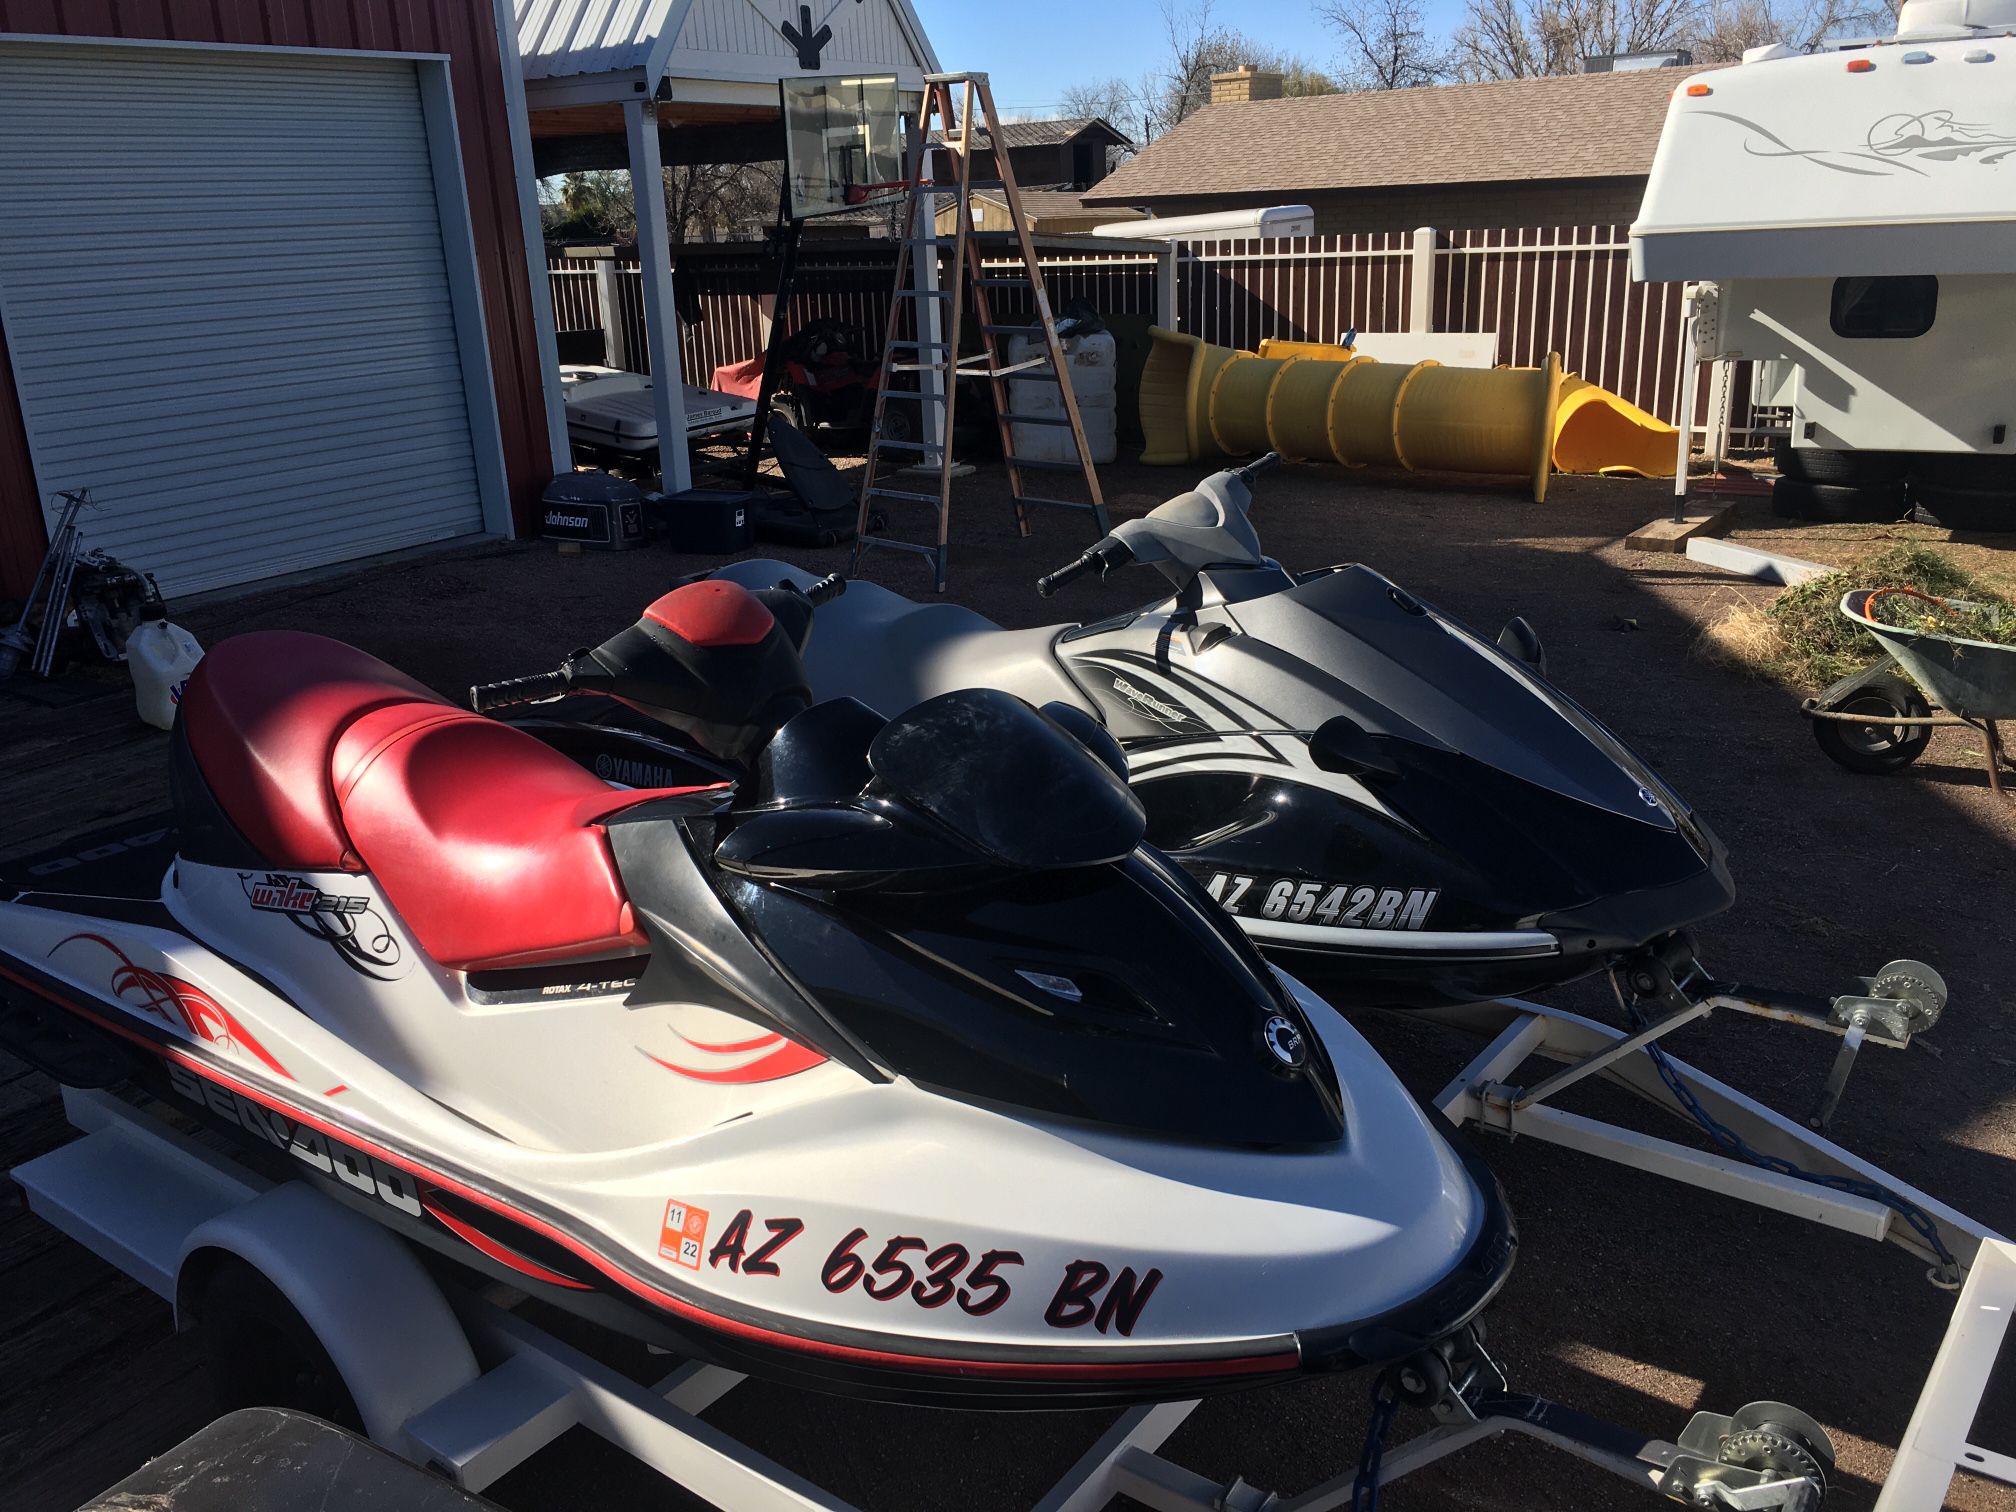 Supercharged Sea Doo Wake 215  and Yamaha Wave Runner VR Deluxe Four Cylinder - Both Four Strokes 